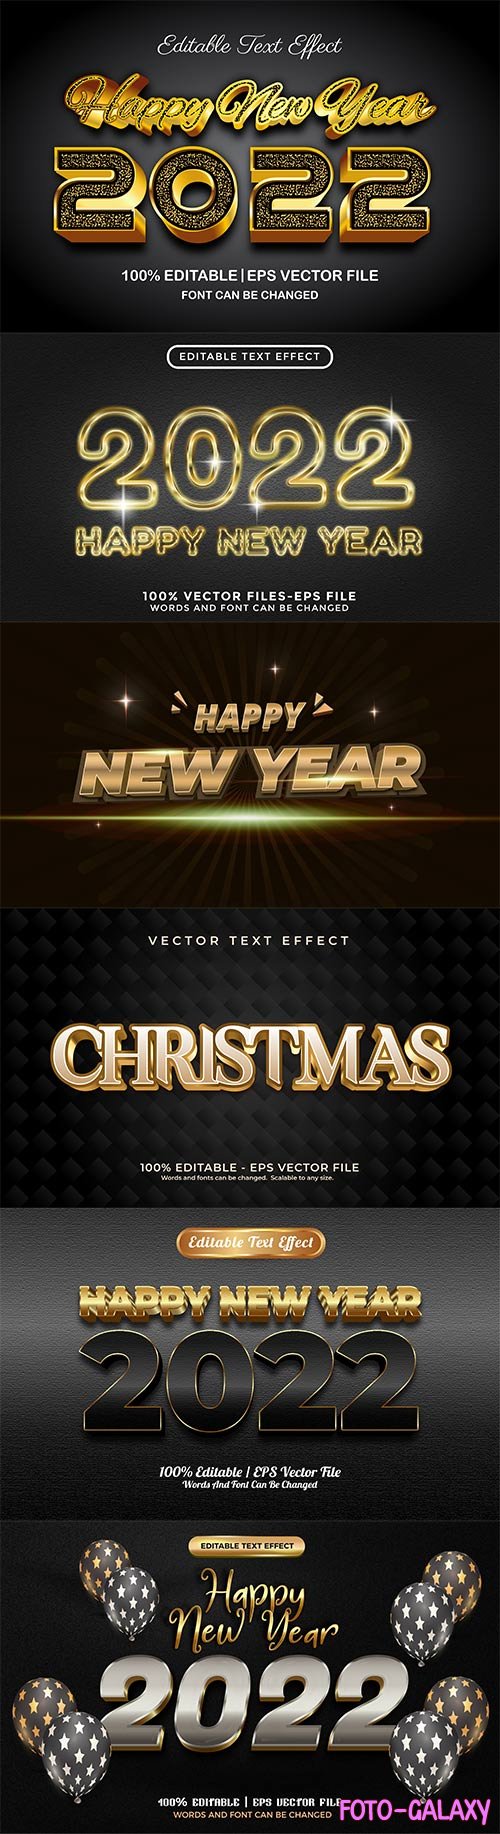 2022 New year and christmas editable text effect vector vol 29